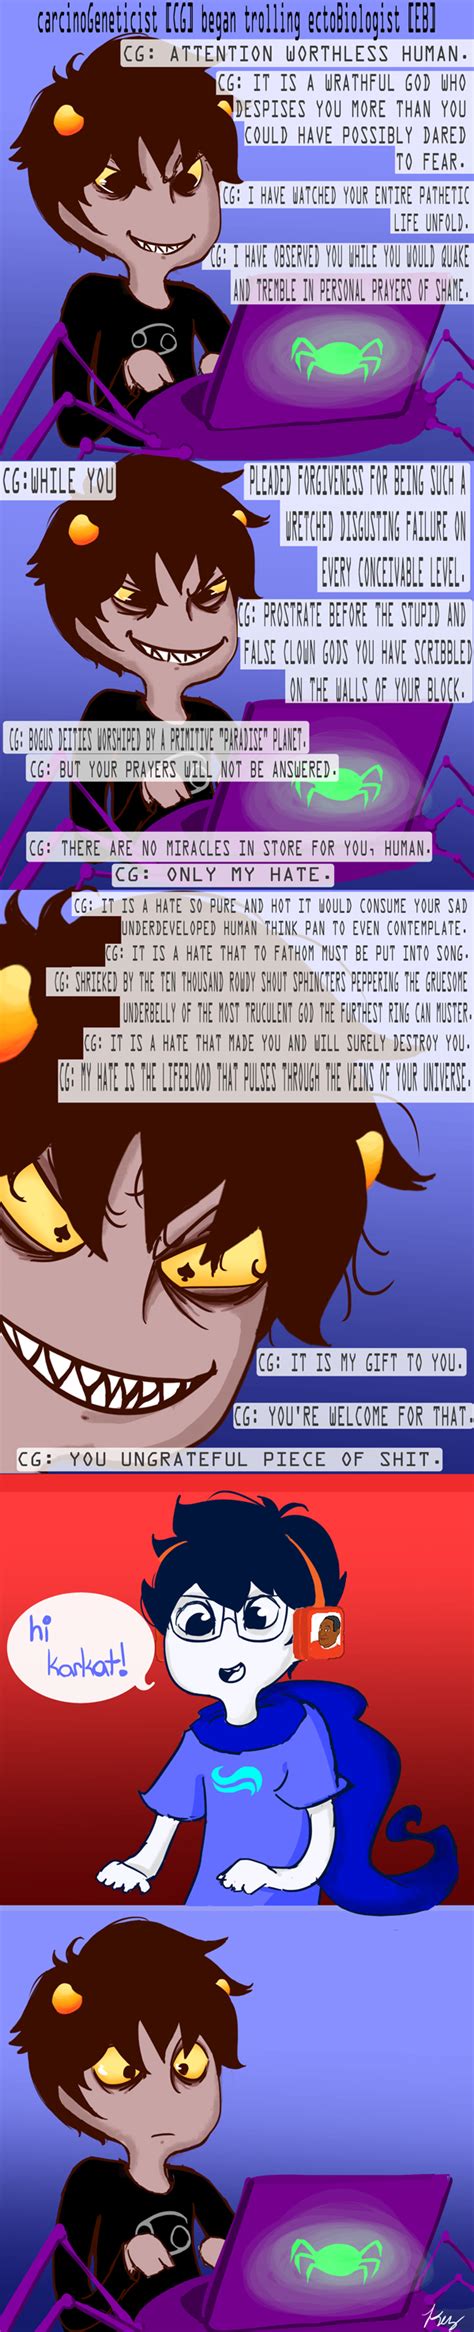 As you might have guessed, this page produces random quotes from the webcomic homestuck. karkat: troll this worthless human | Tumblr